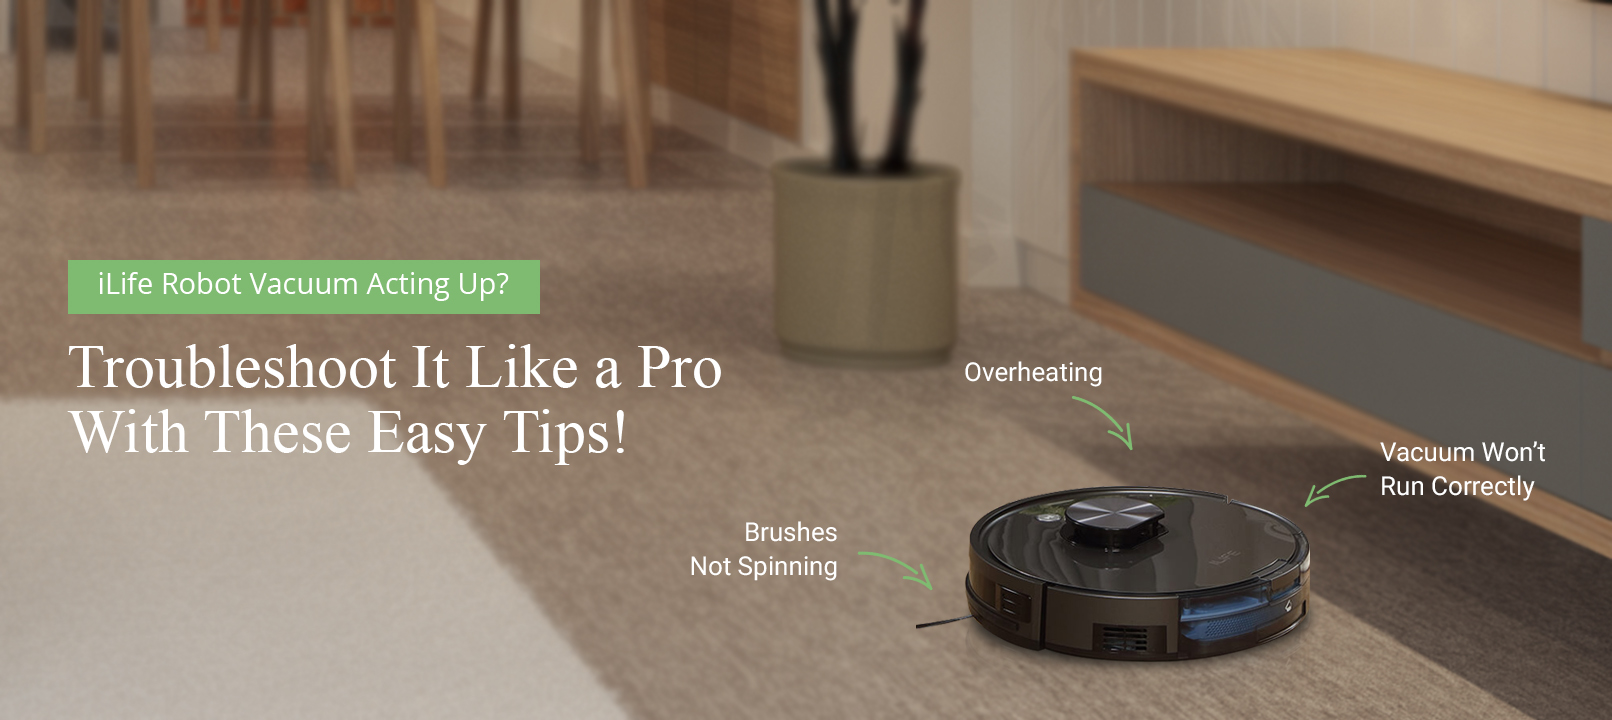 How to Empty Ilife Robot Vacuum? - A Comprehensive Guide